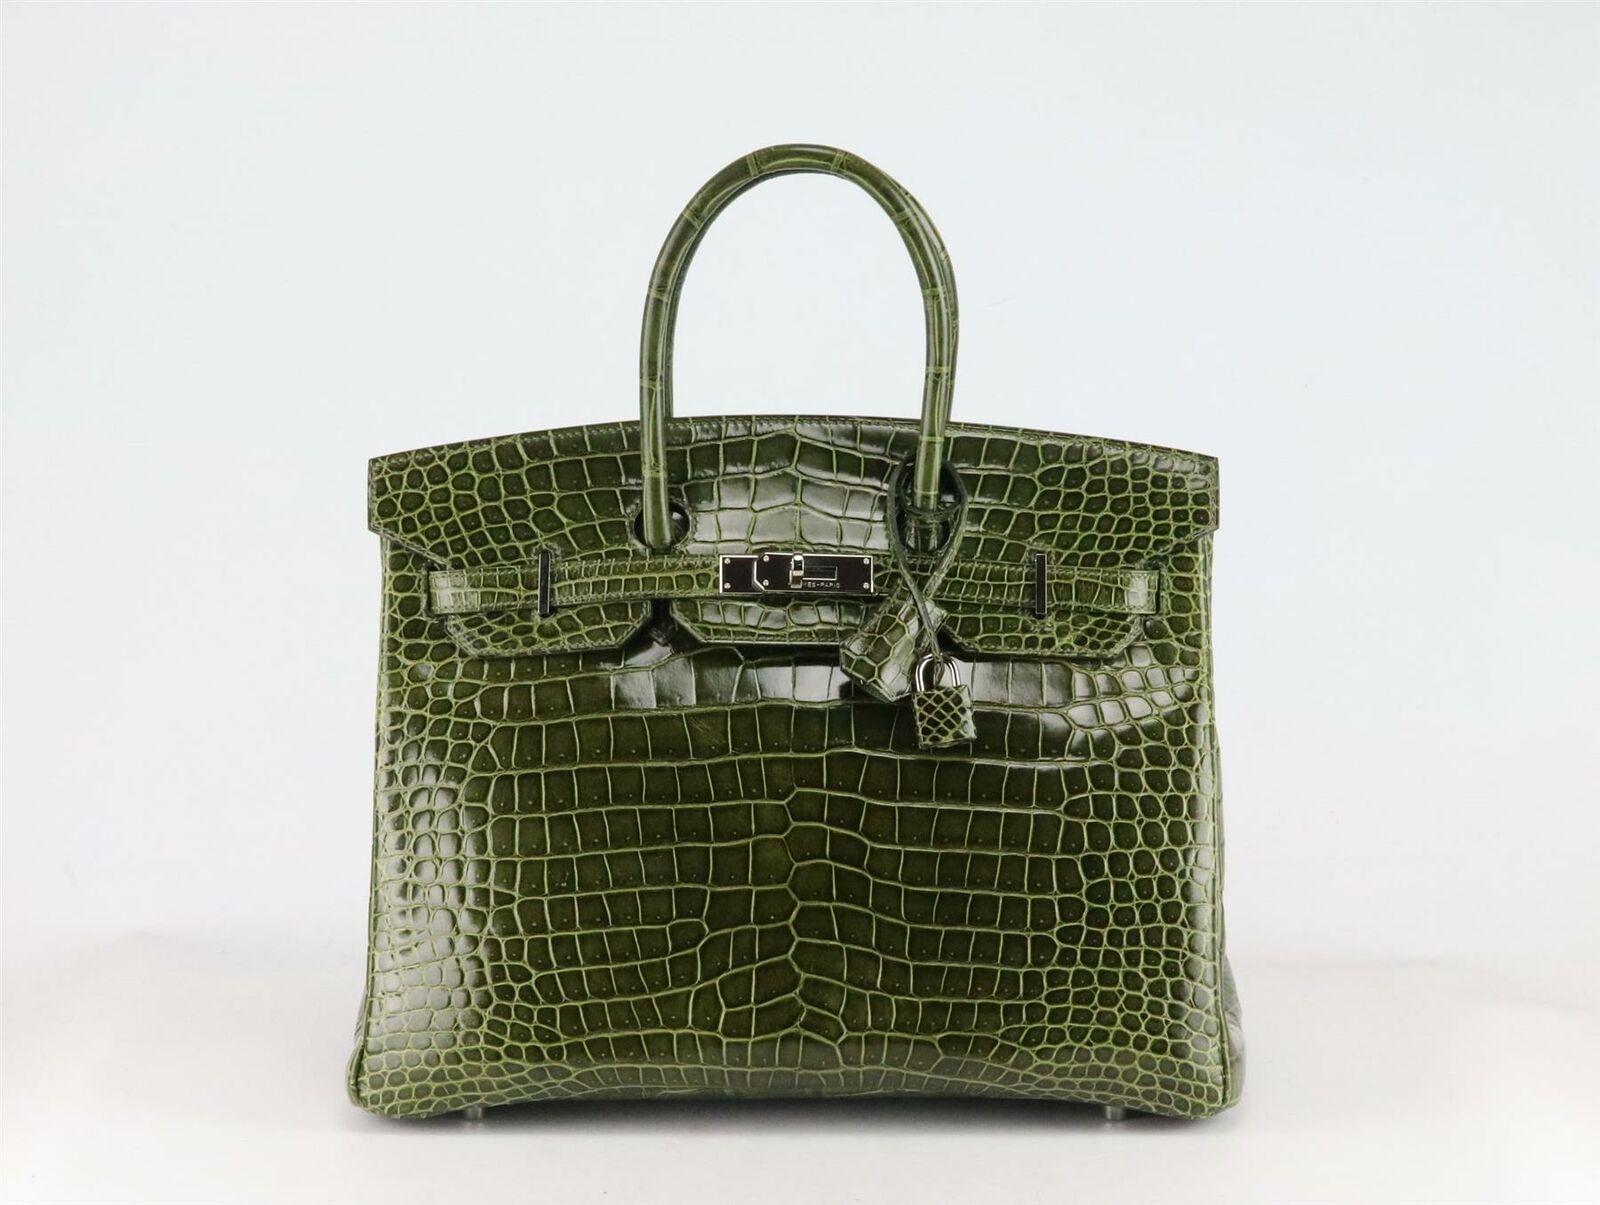 Made in France, this beautiful 2012 Hermès ‘Birkin’ 35cm handbag has been made from shiny Porosus Crocodile exterior in ‘Pelouse Chevre’ green and matching leather interior, this piece is decorated with gold hardware on the front and finished with